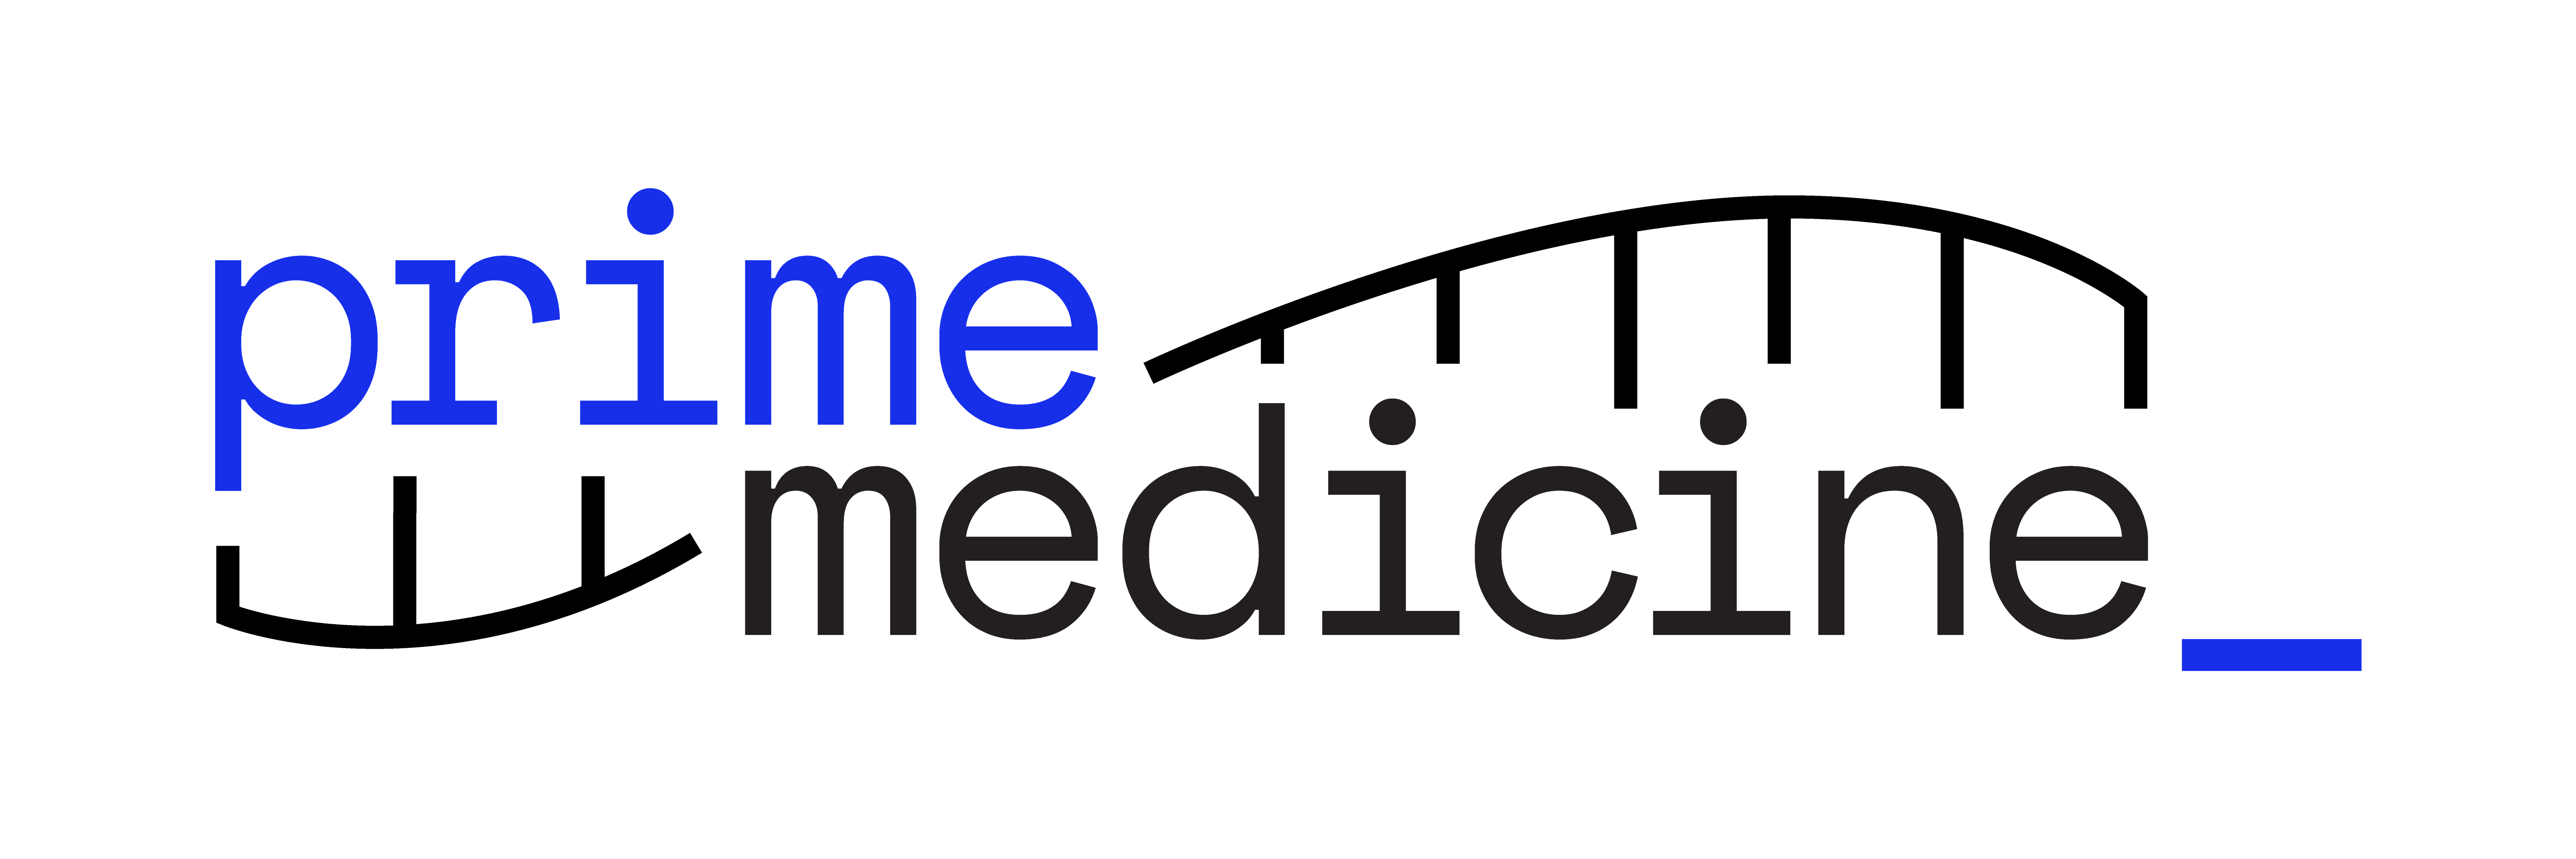 Prime Medicine to Present at Virtual Investor Conferences in May